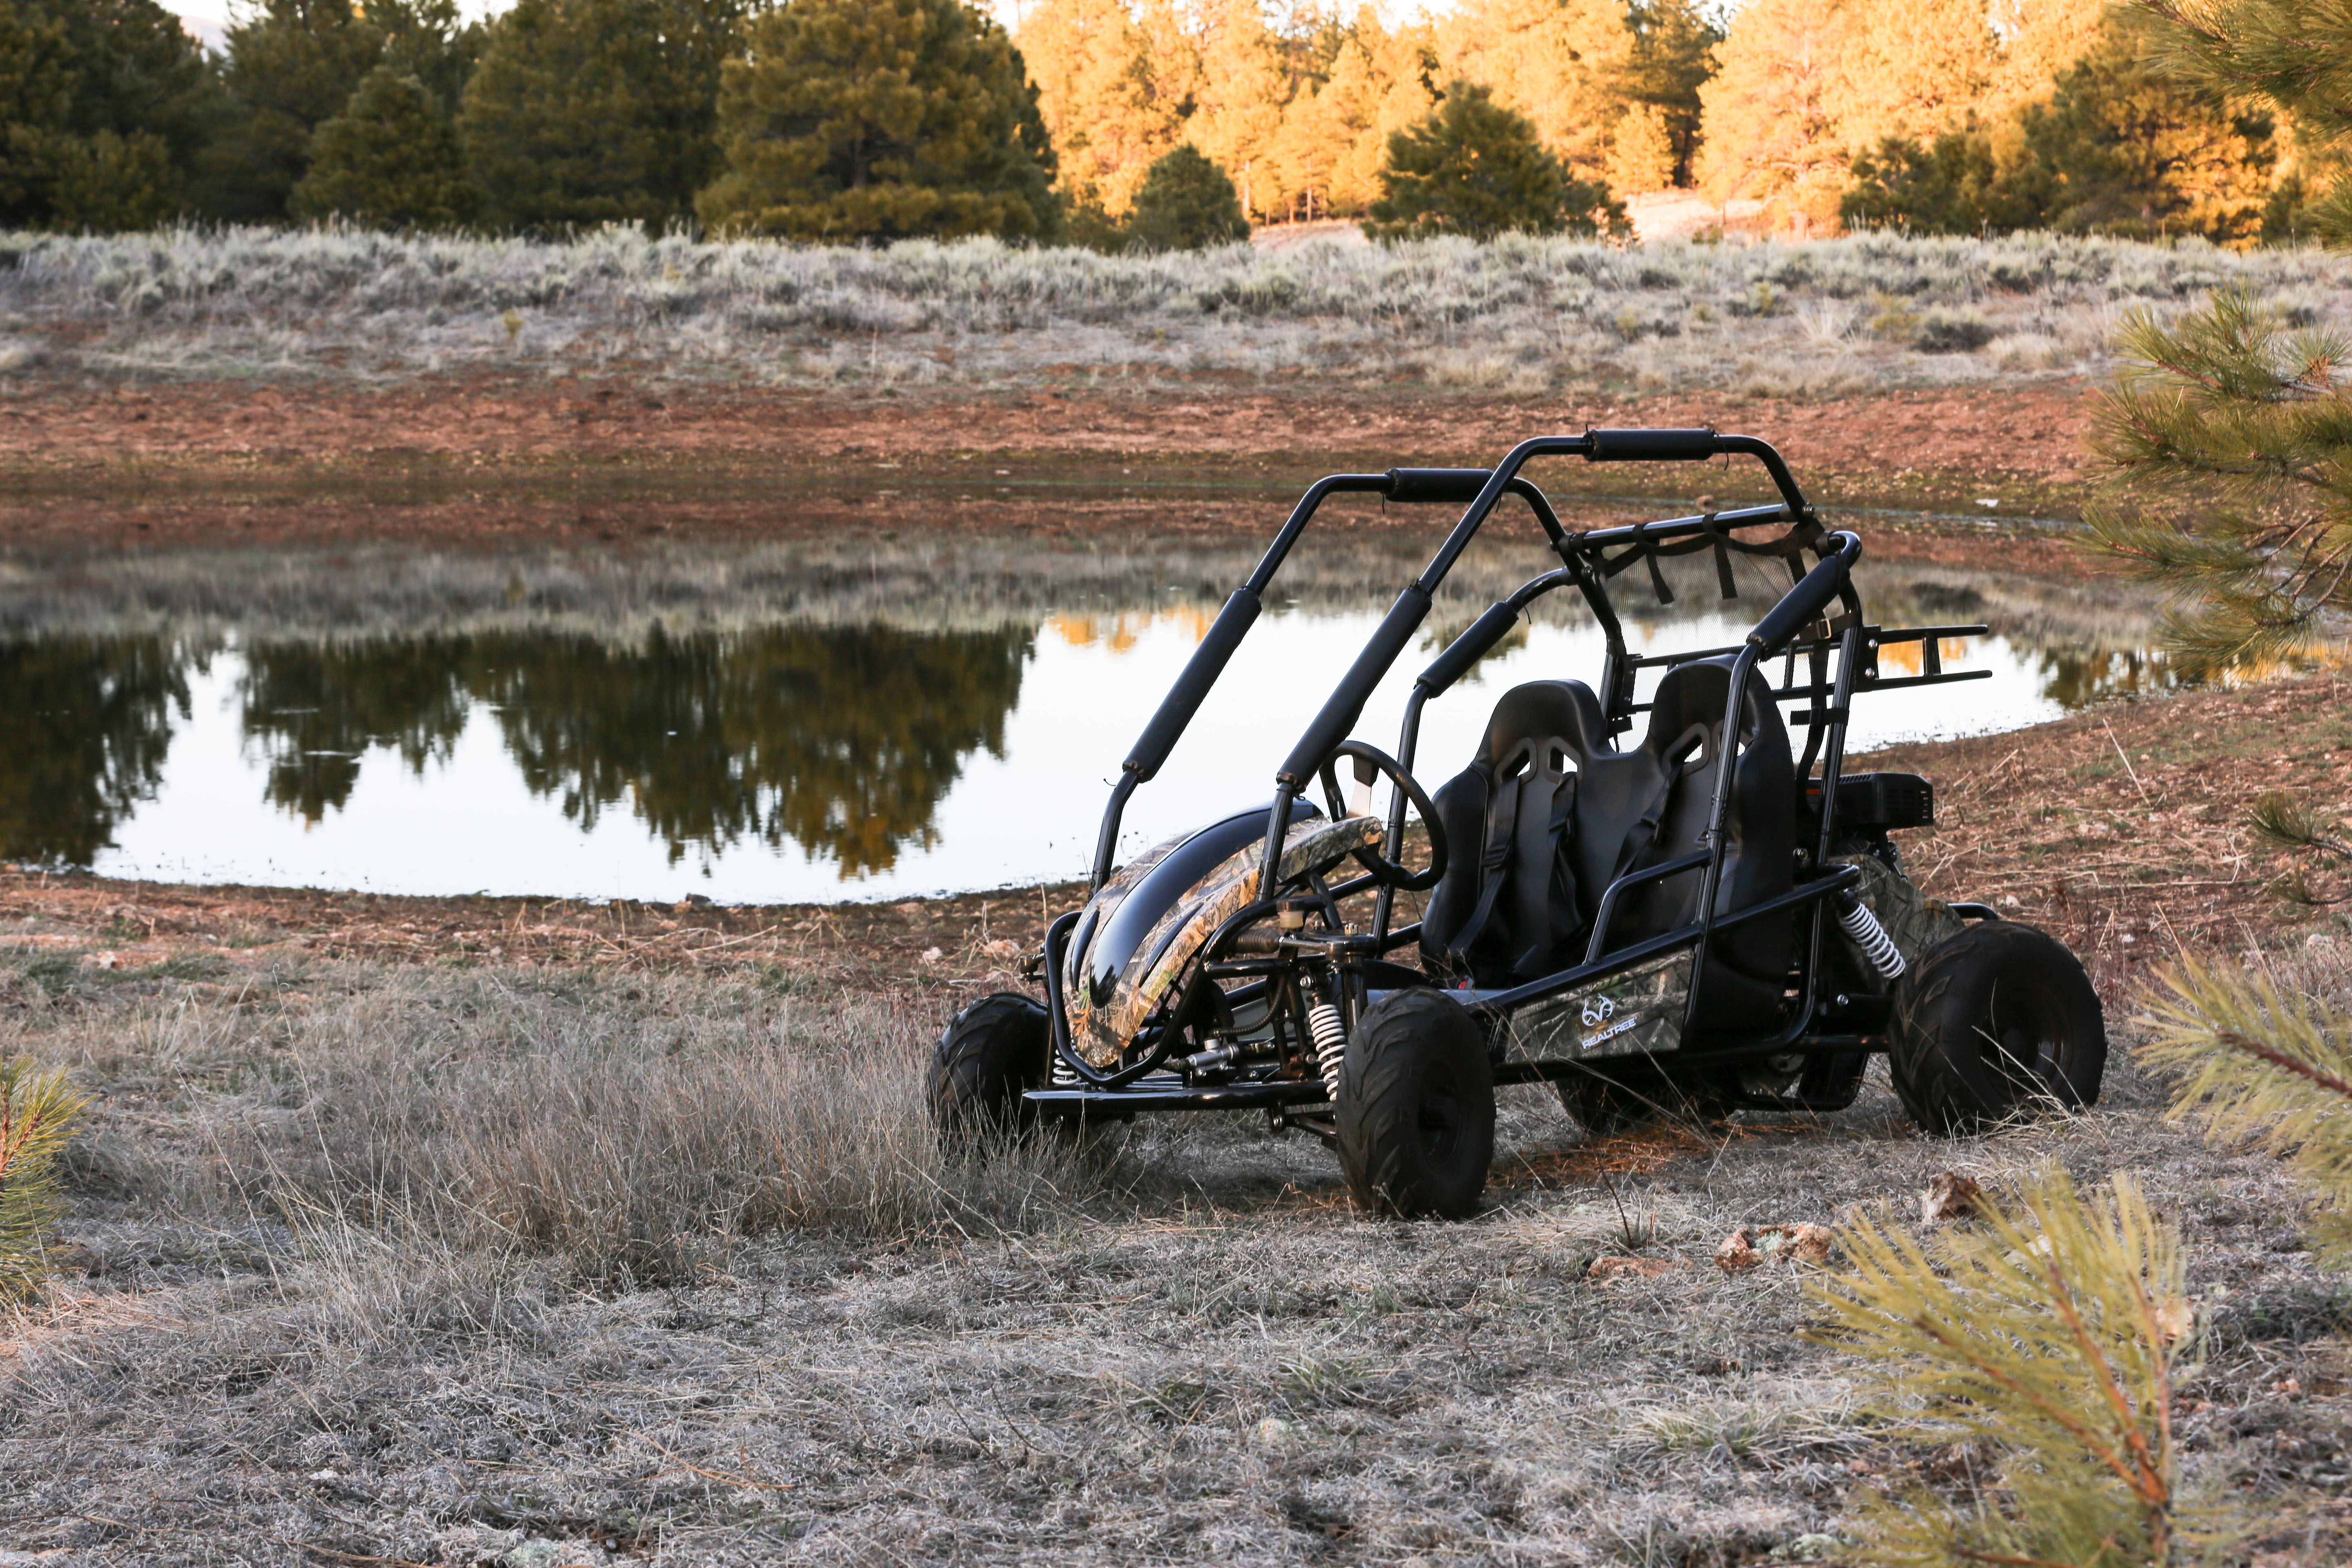 Realtree RTK196 Gas Powered 196cc Camo Power Ride-On Go Cart - image 3 of 3